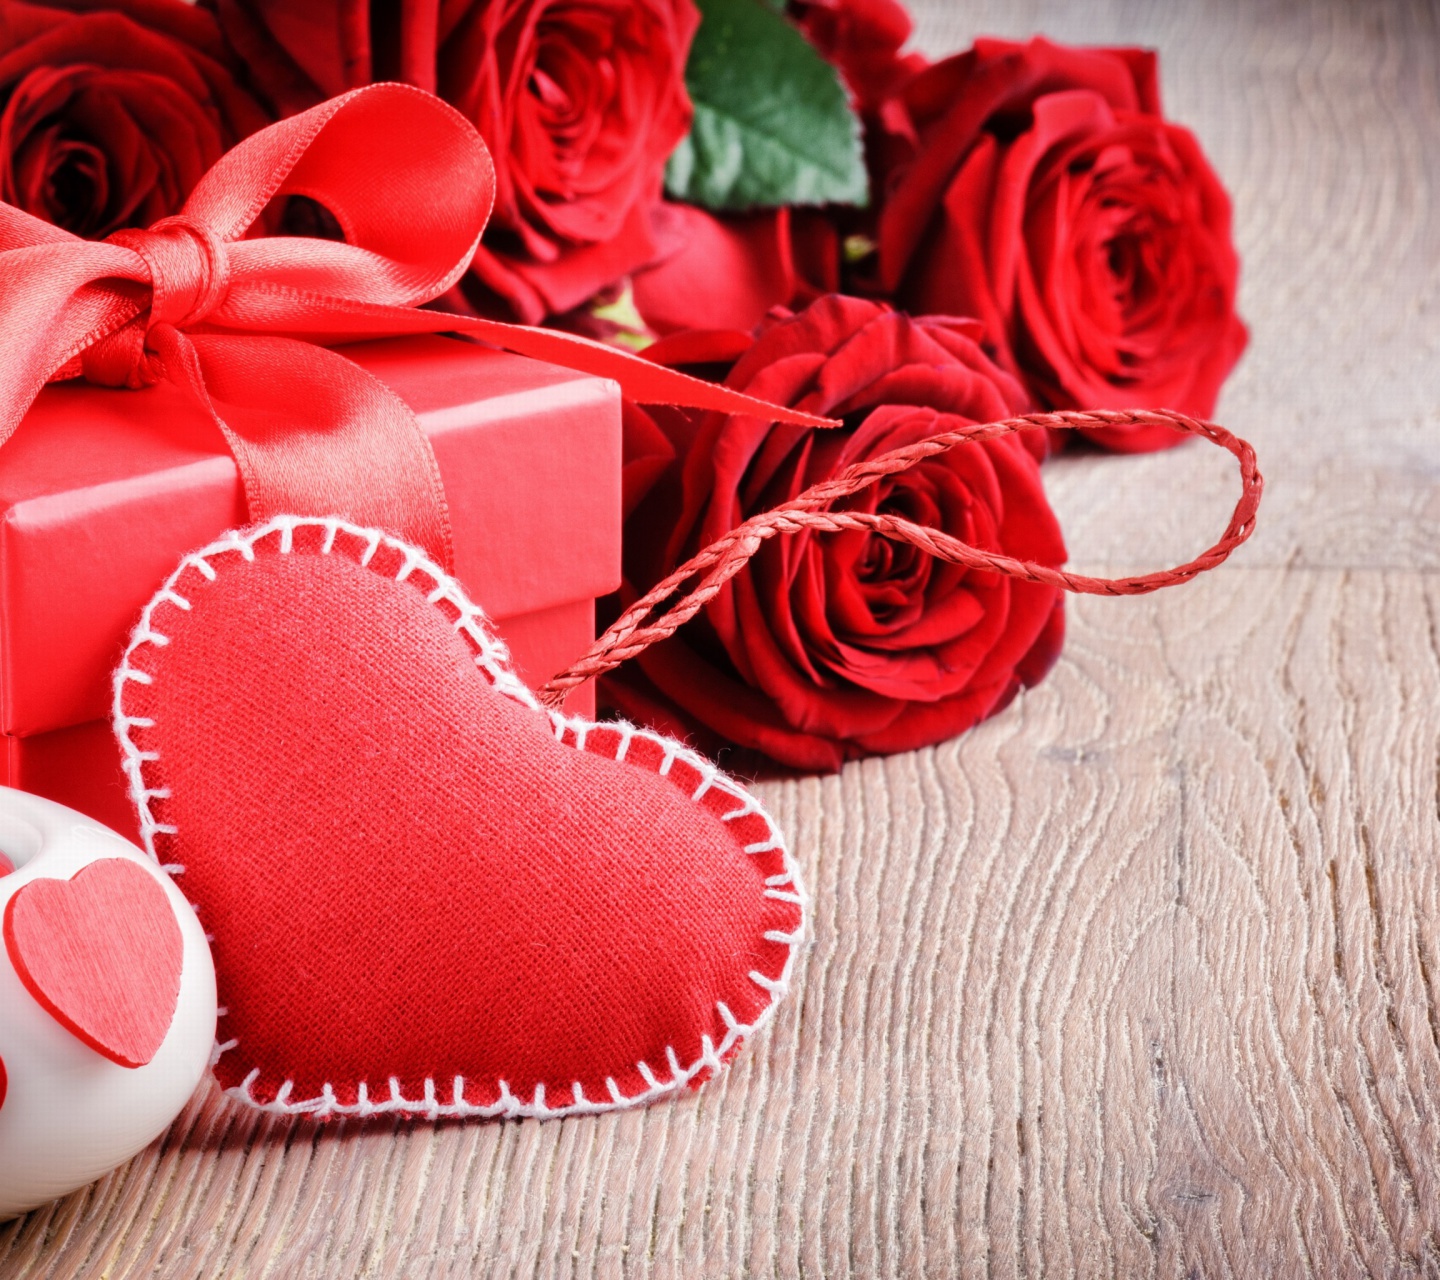 Valentines Day Gift and Hearts wallpaper 1440x1280